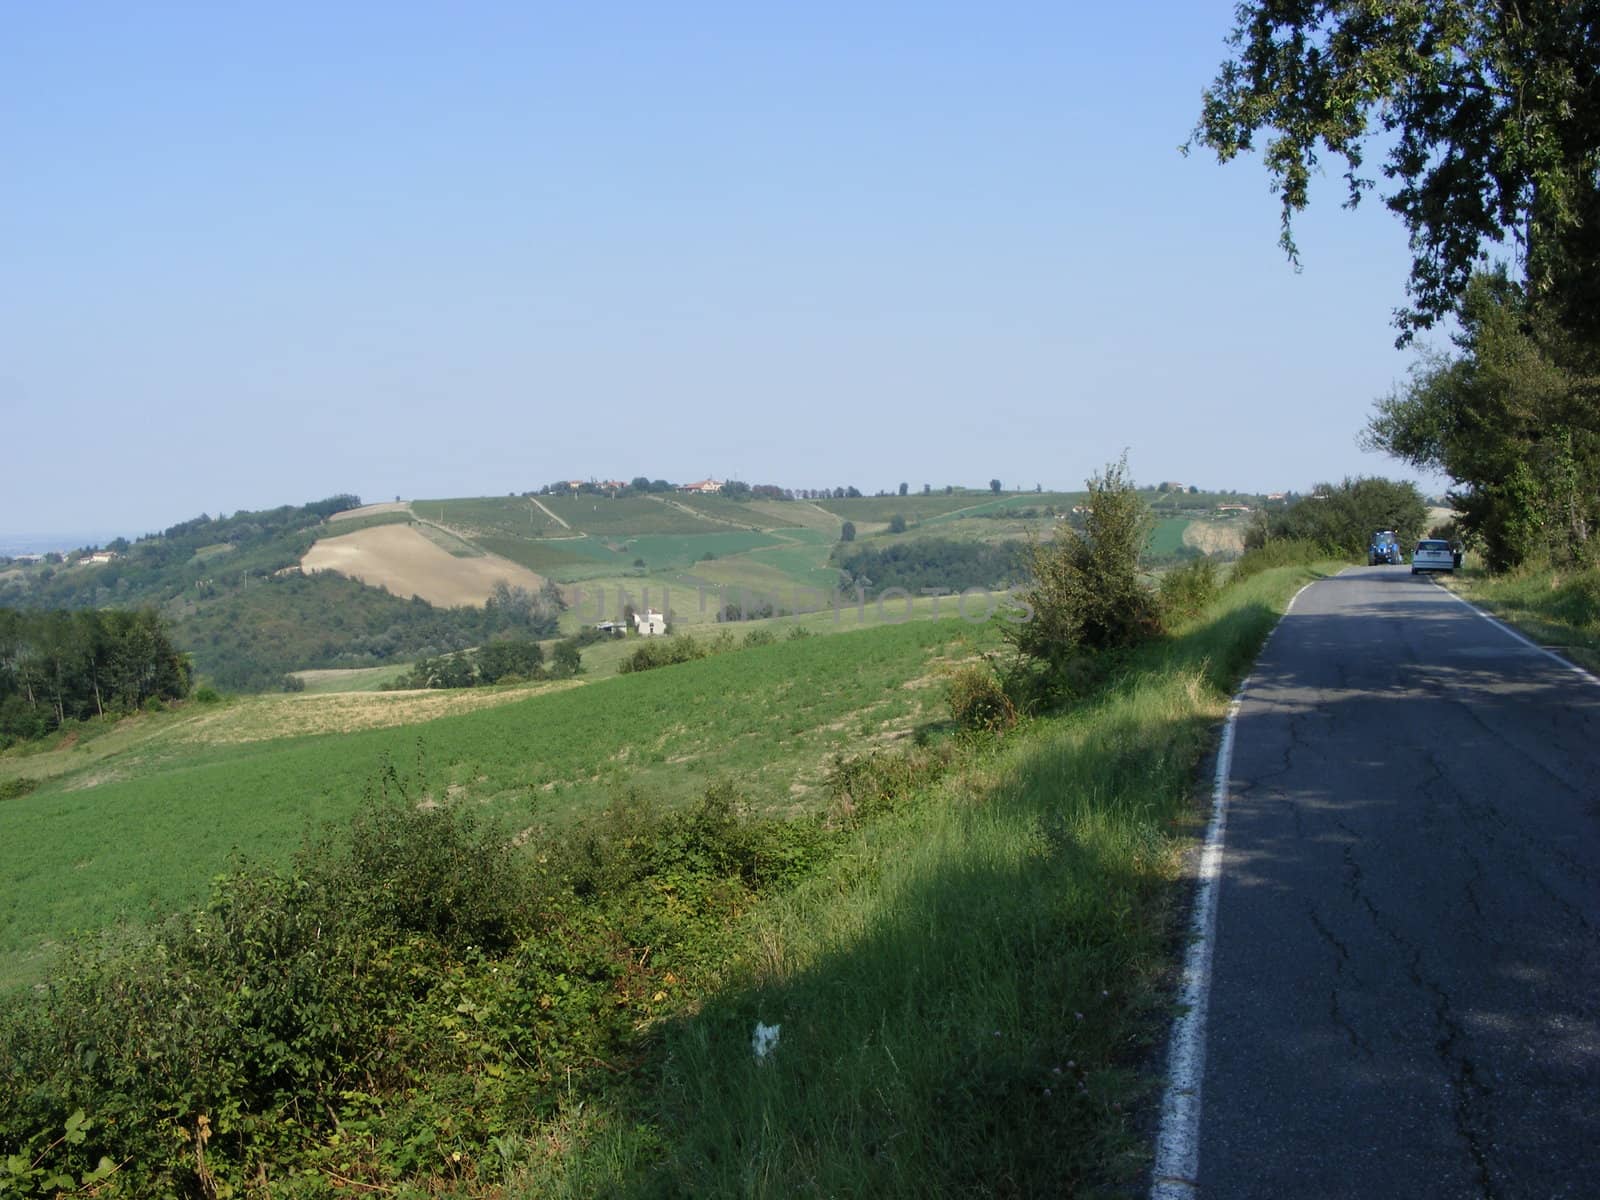 Landscape of hills and fields